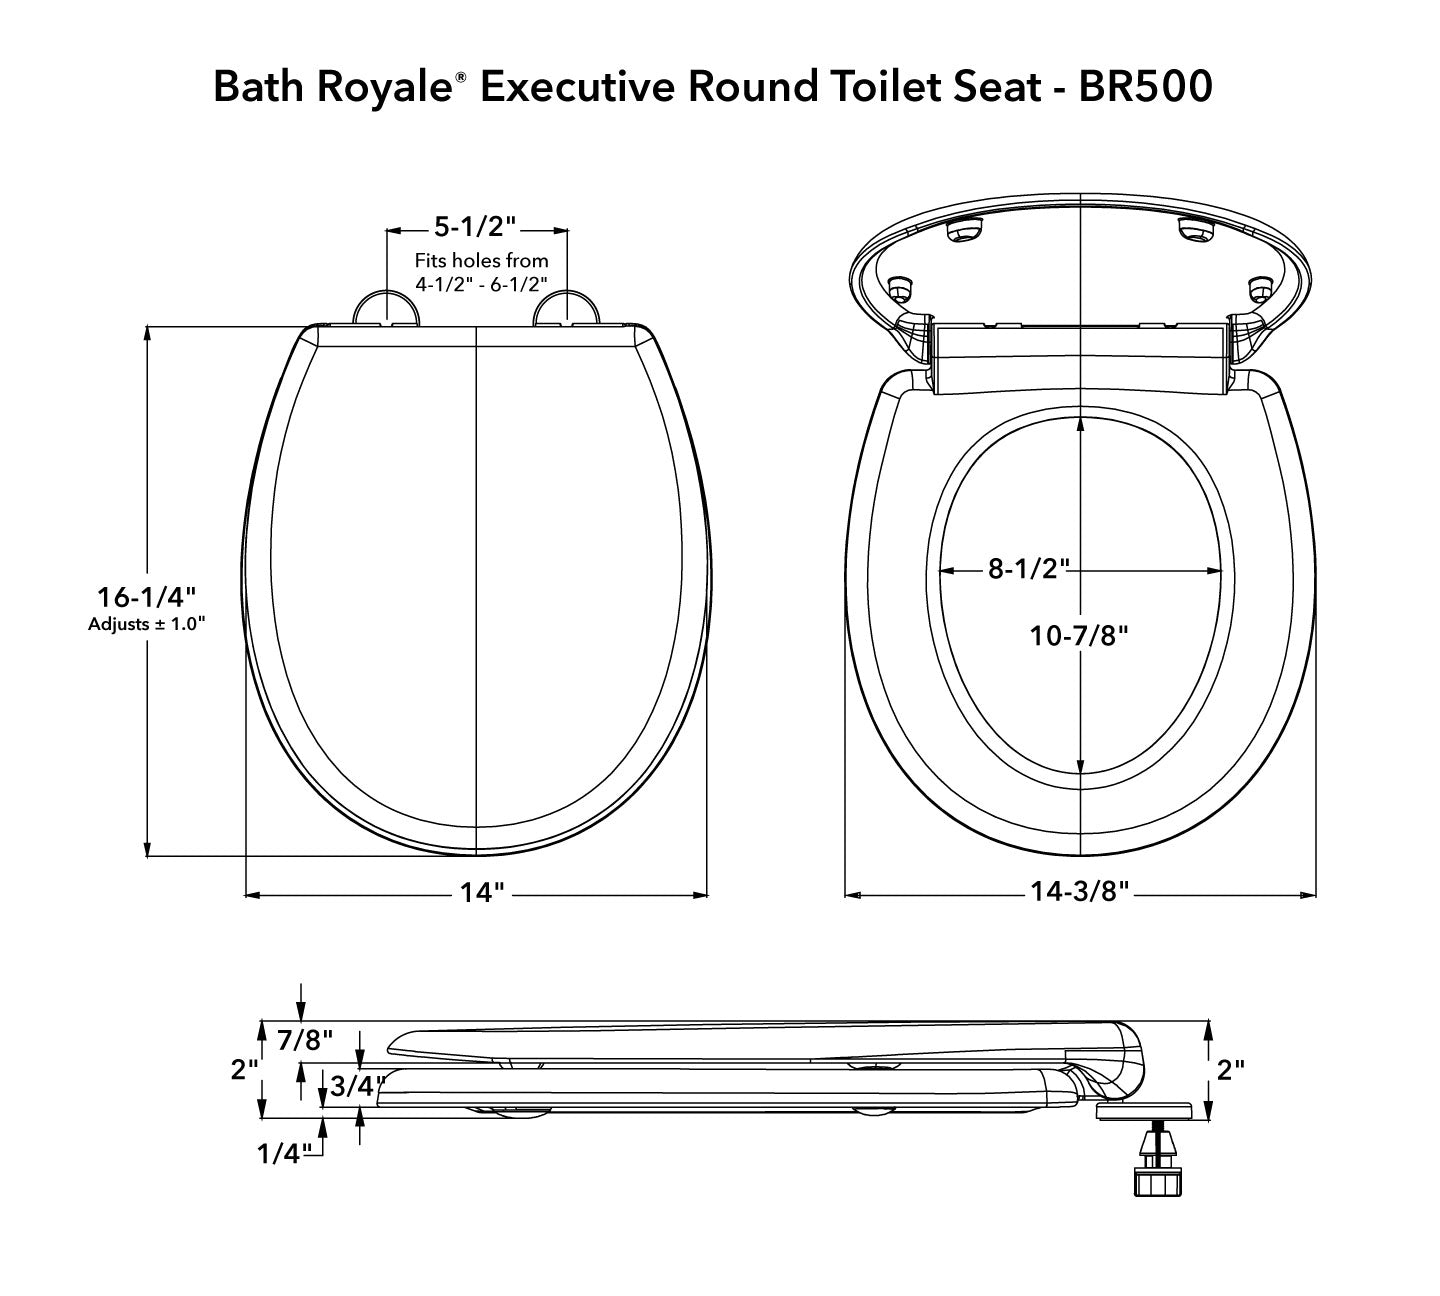 BR500 Executive Round Toilet Seat Dimensions